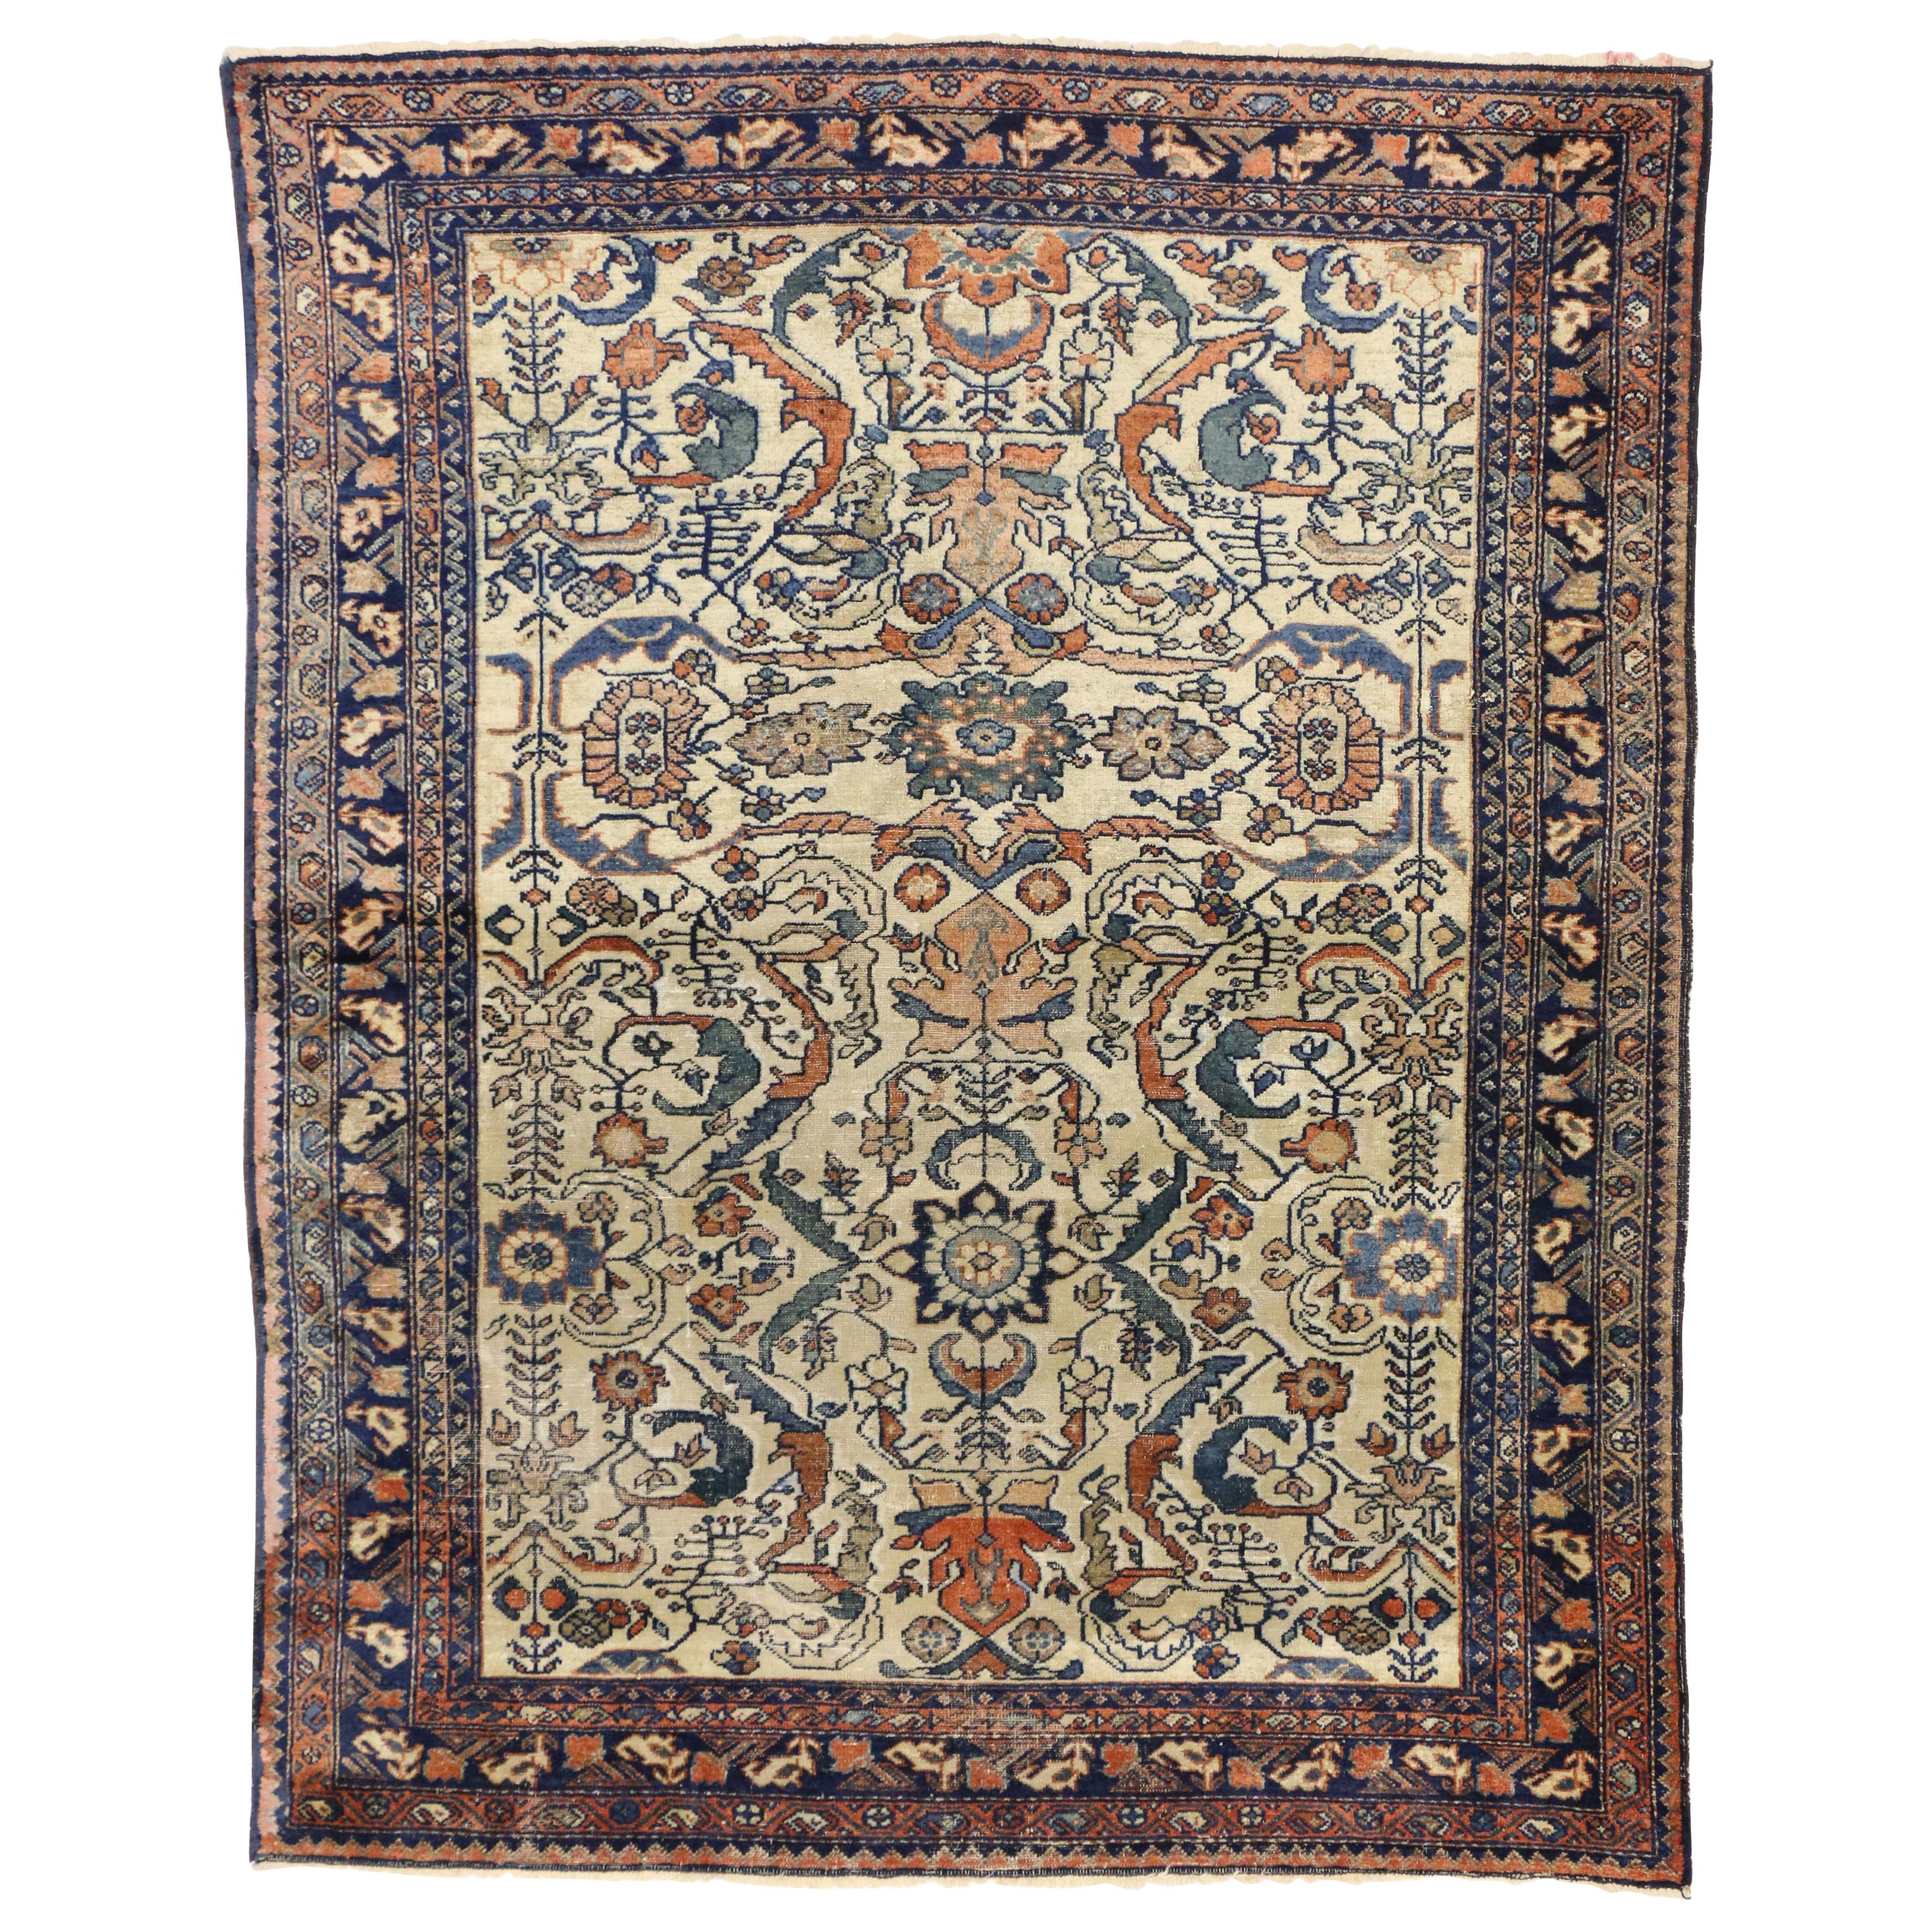 Antique Persian Lilihan Area Rug with Rustic Romantic Industrial Style